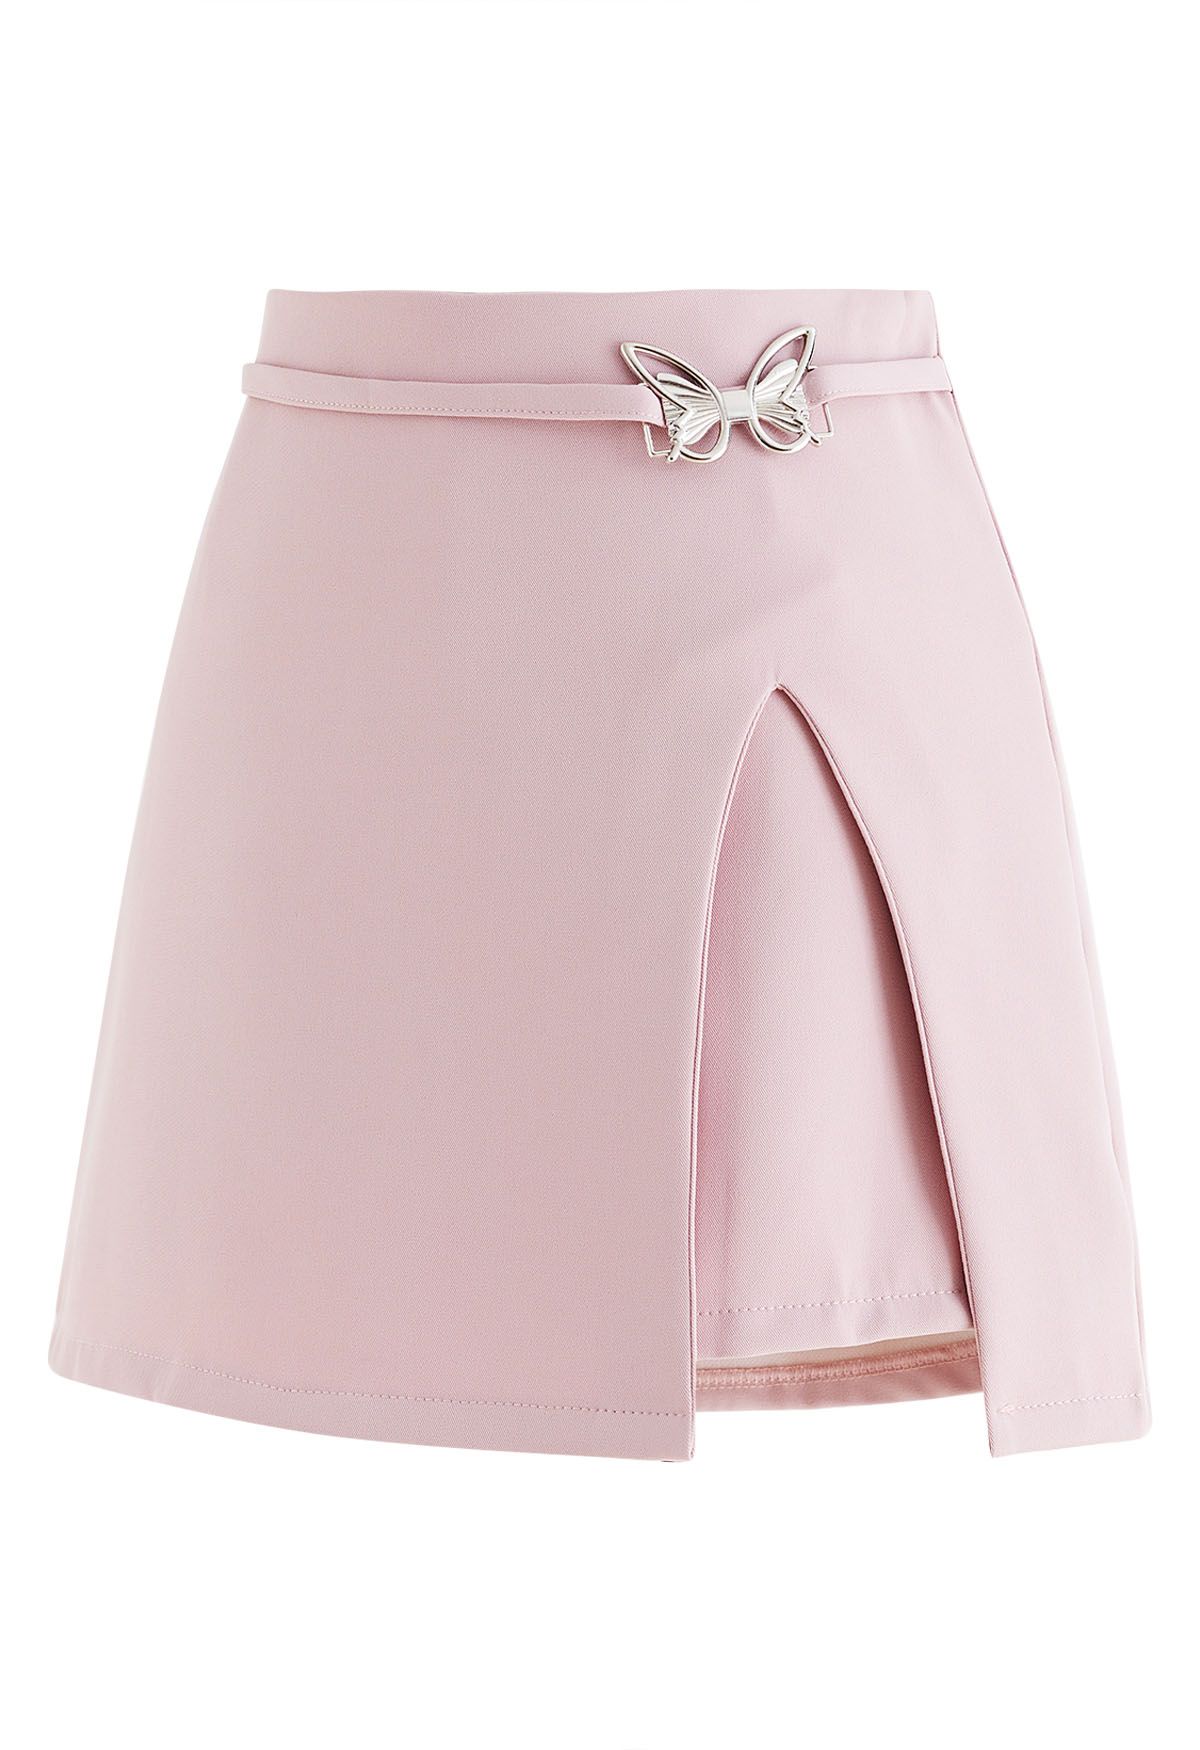 Metal Butterfly Decorated Slit Mini Bud Skorts in Pink